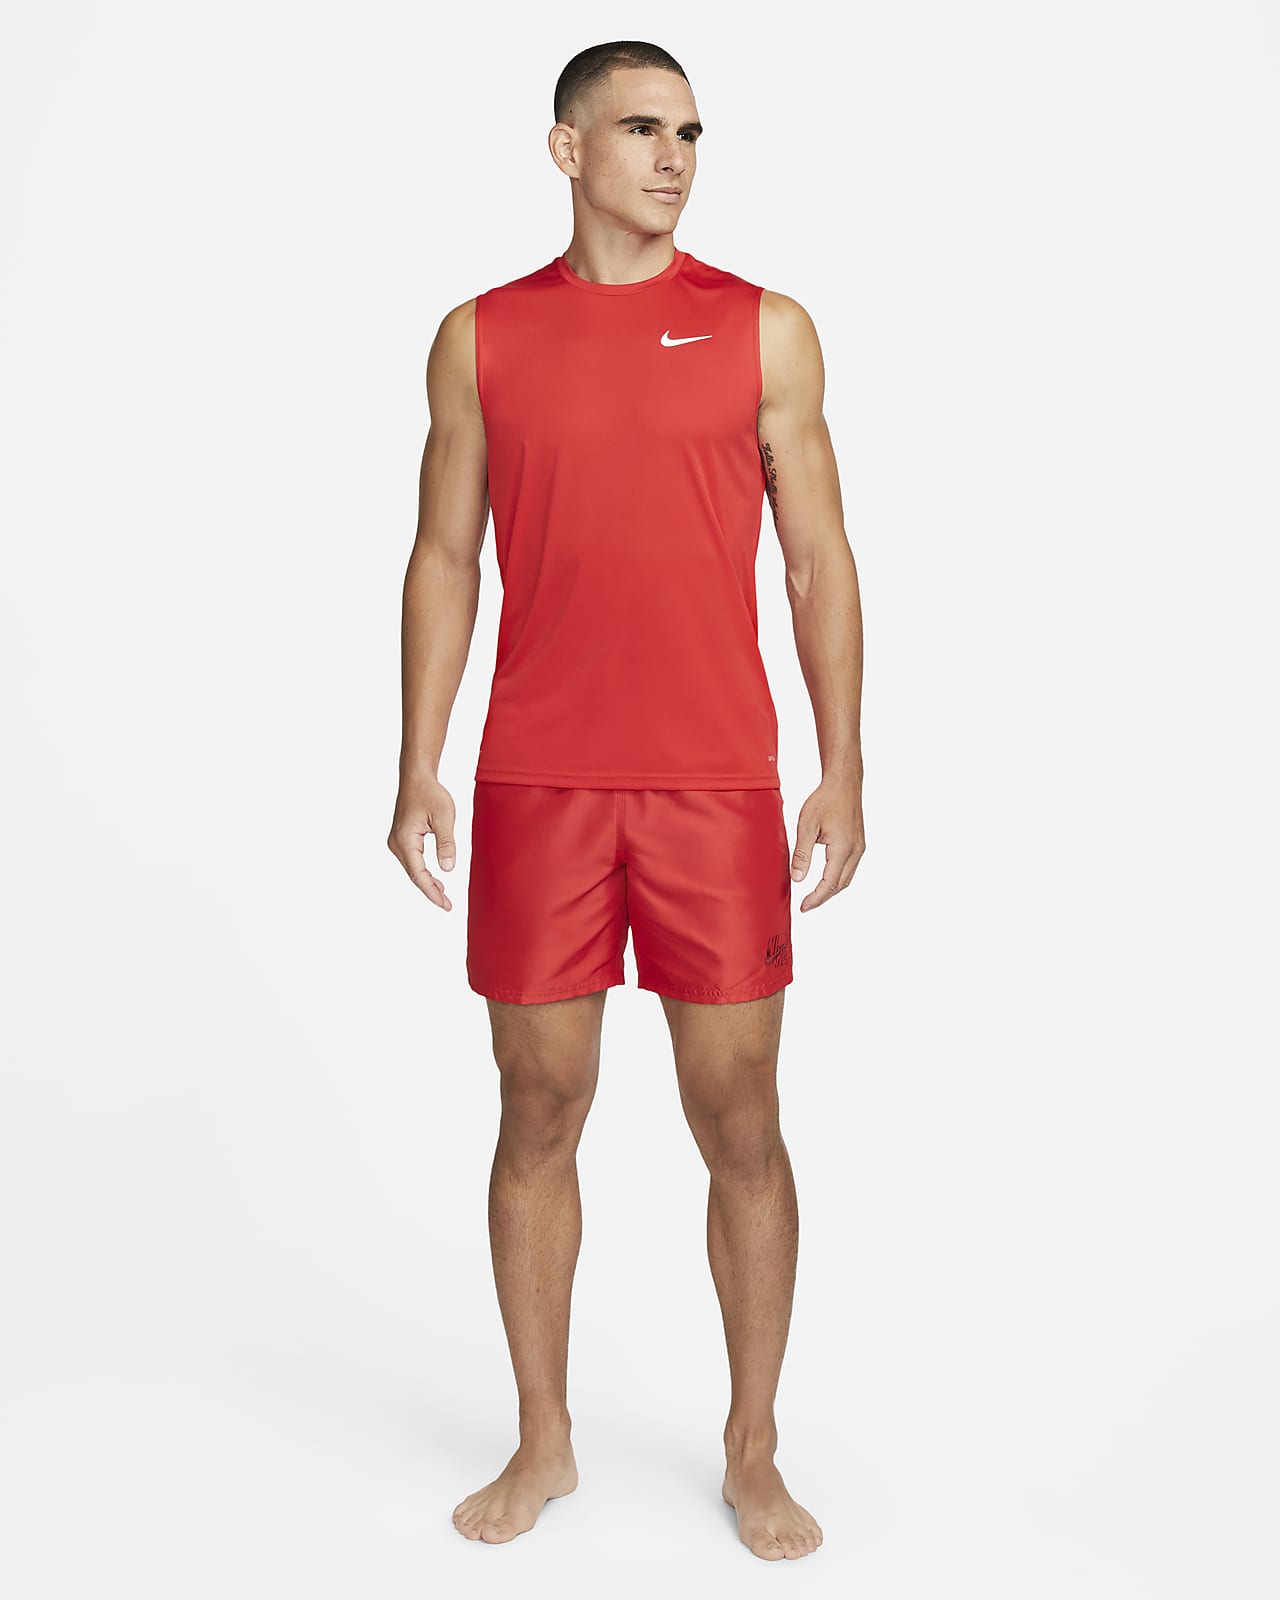 Nike Men's Essential Sleeveless Hydroguard, Red, Size: XL